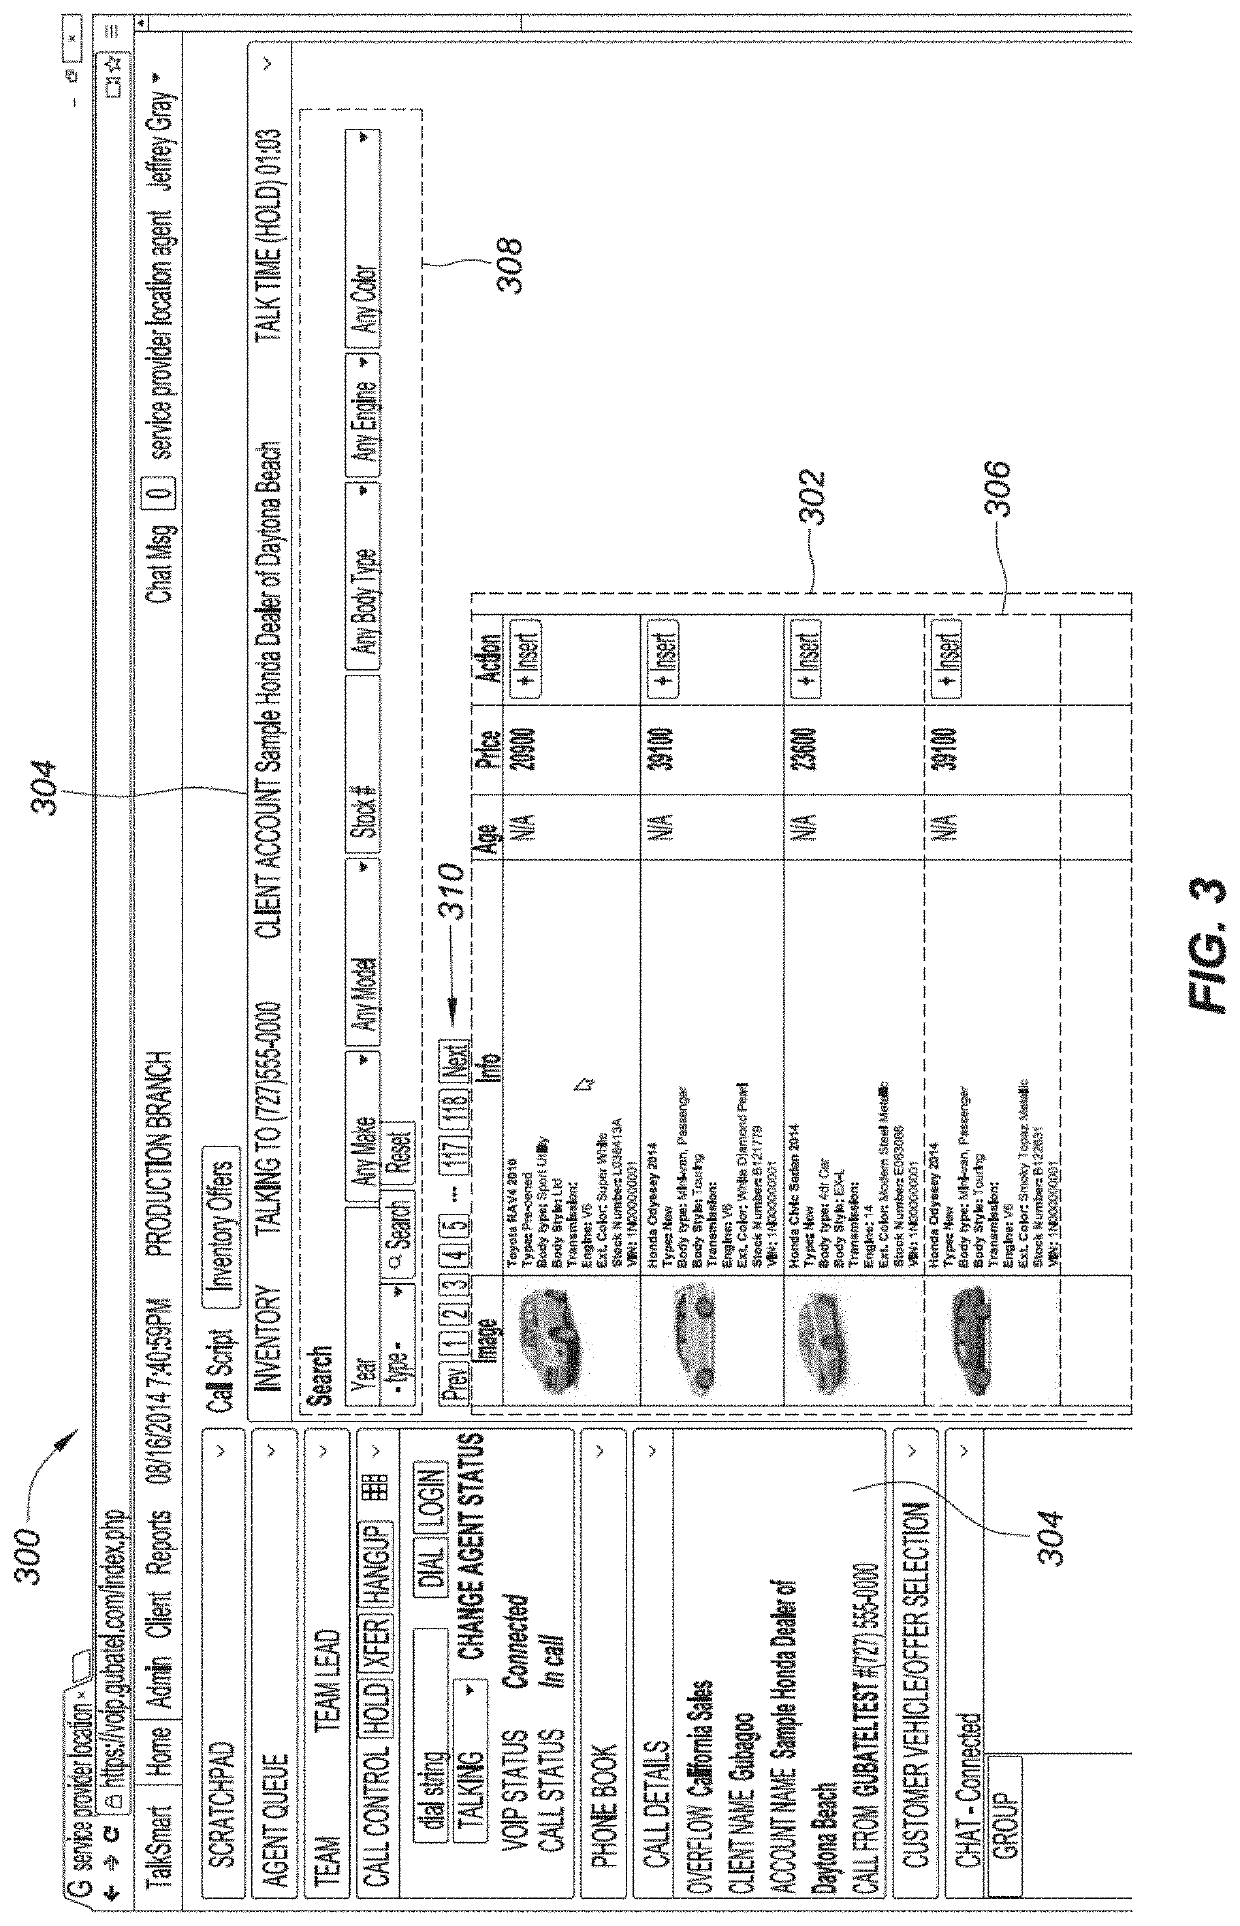 Systems and methods for call backup and takeover using web and mobile interfaces